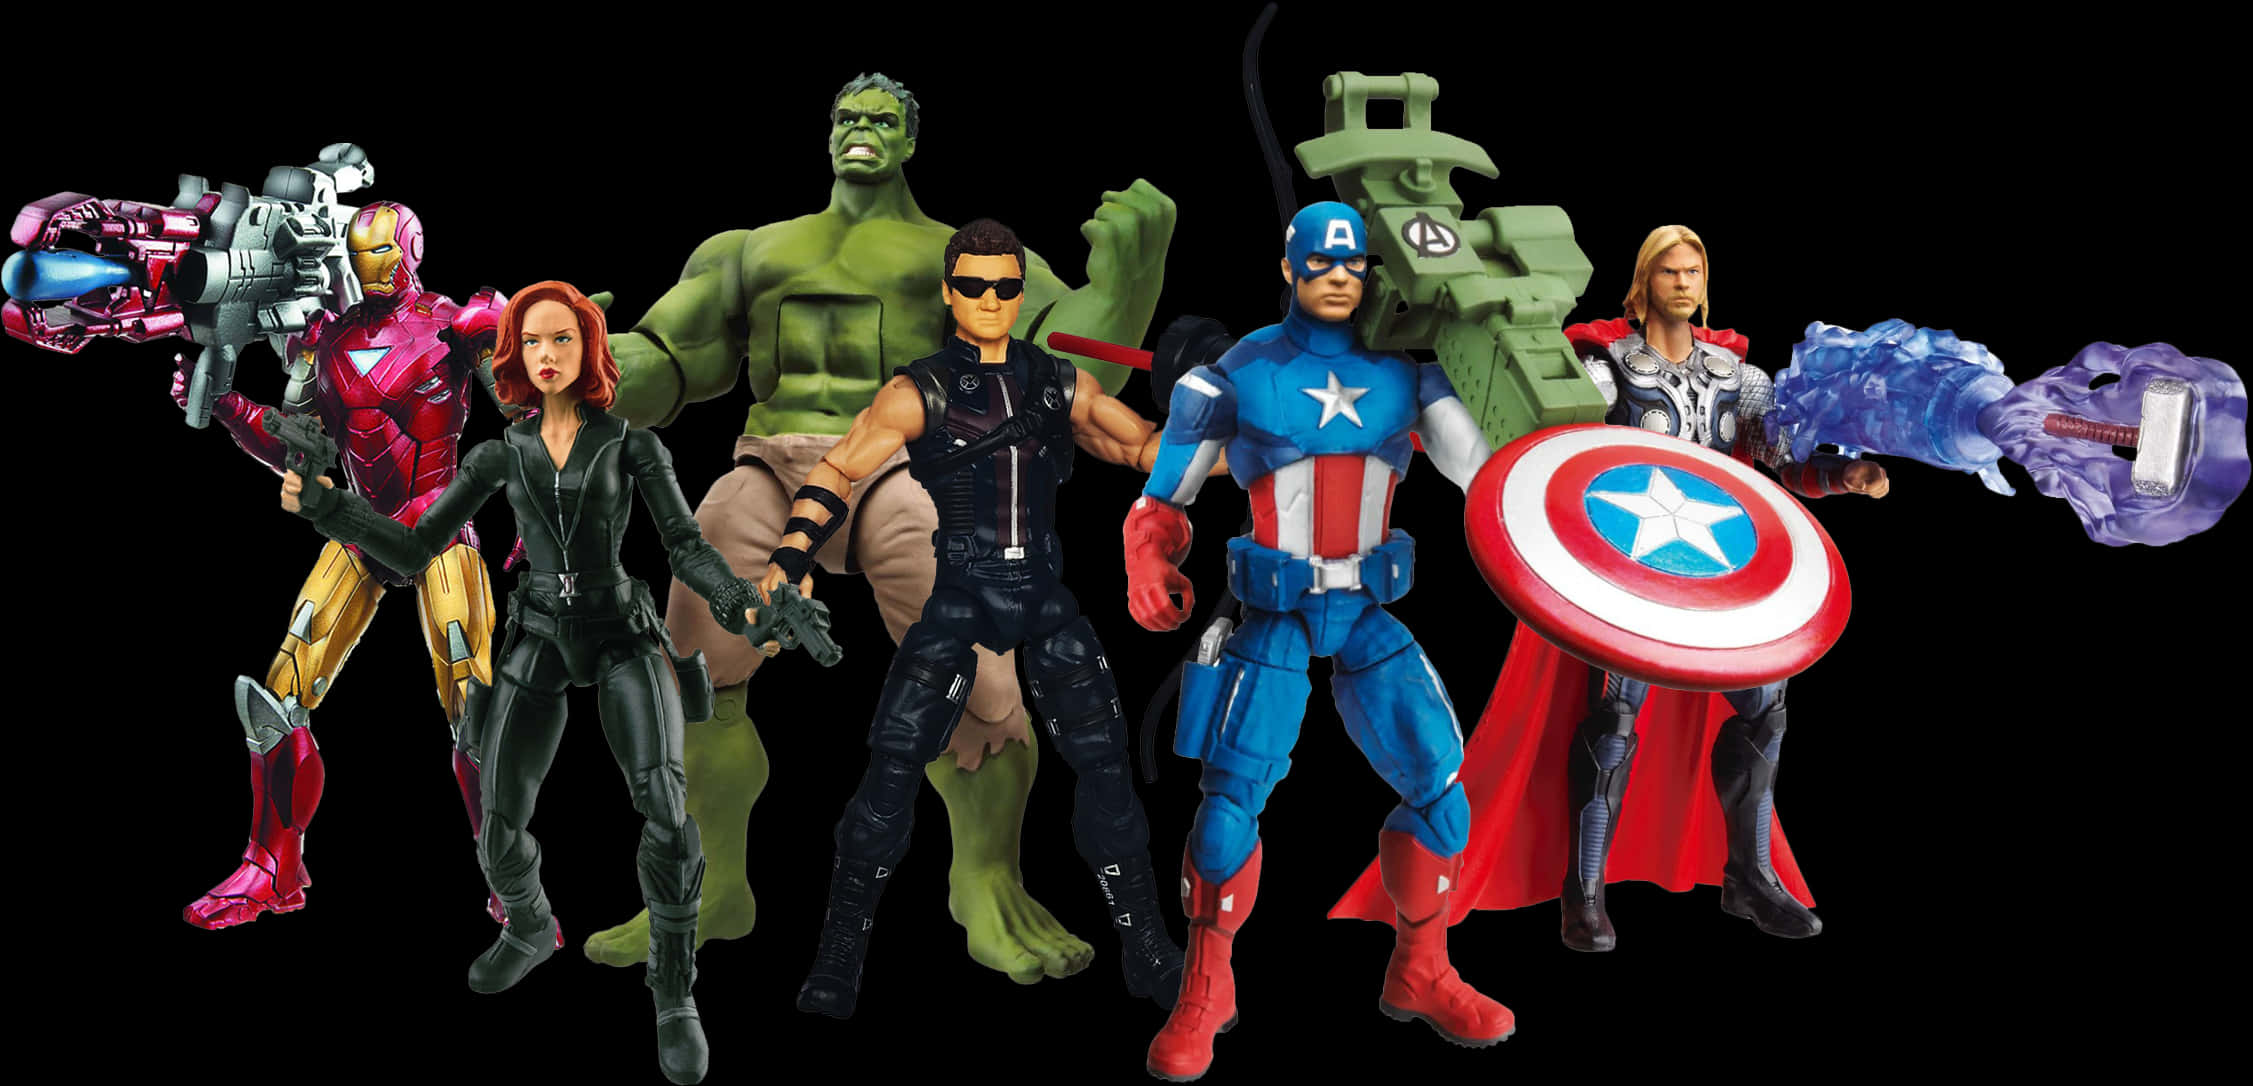 A Group Of Action Figures